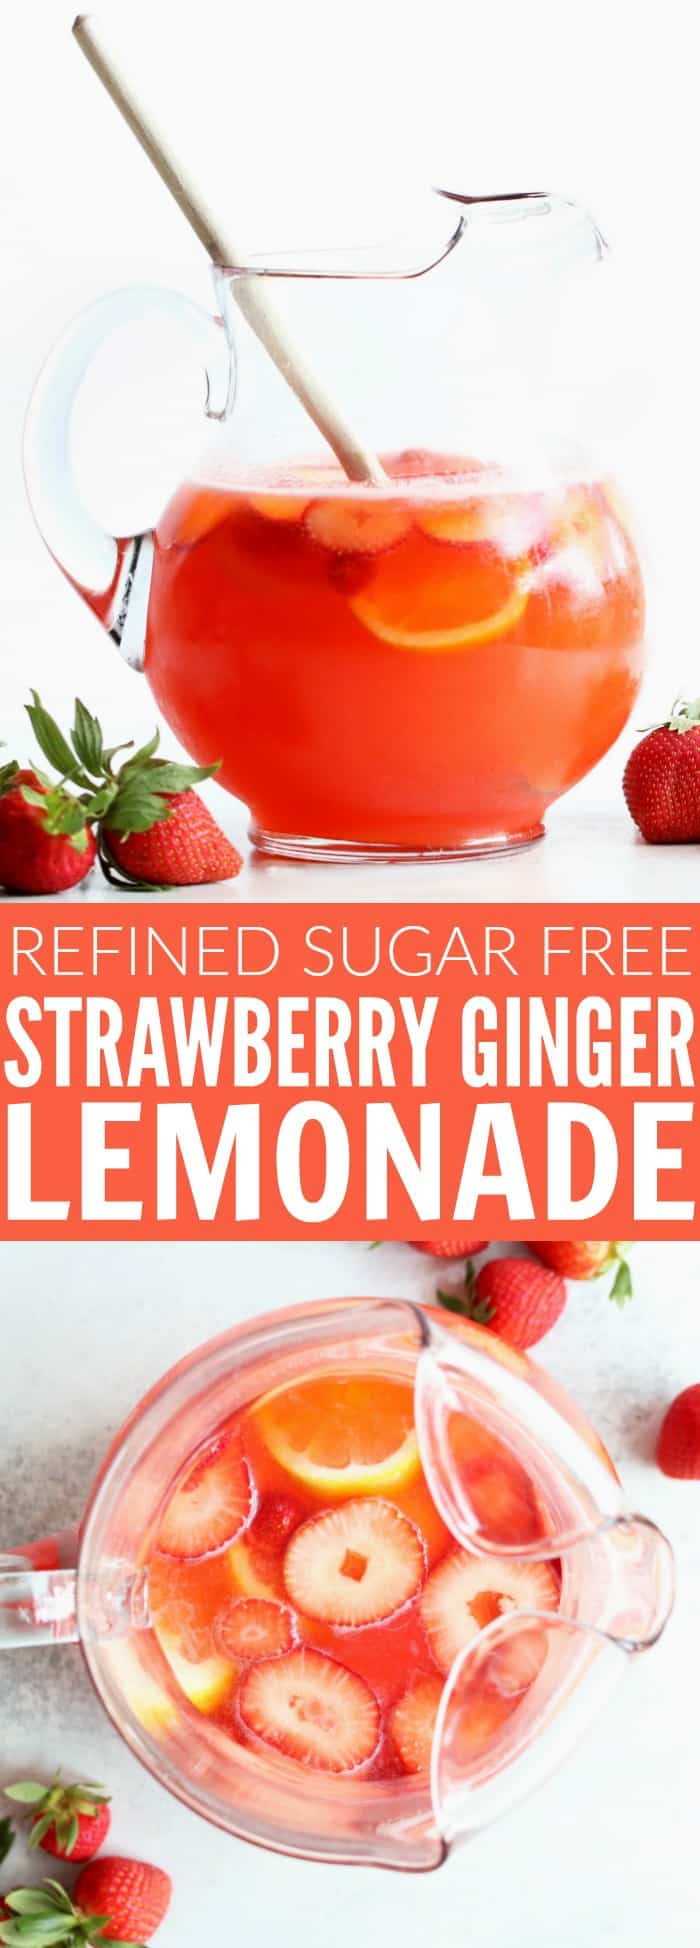 You guys are going to love this strawberry ginger lemonade!! It's refined sugar free, only a few, fresh ingredients, and perfect for a fun brunch, celebration, or any day of the week! thetoastedpinenut.com #sugarfree #lemonade #strawberry #ginger #beverage #drink #easter #brunch #bridalshower #babyshower